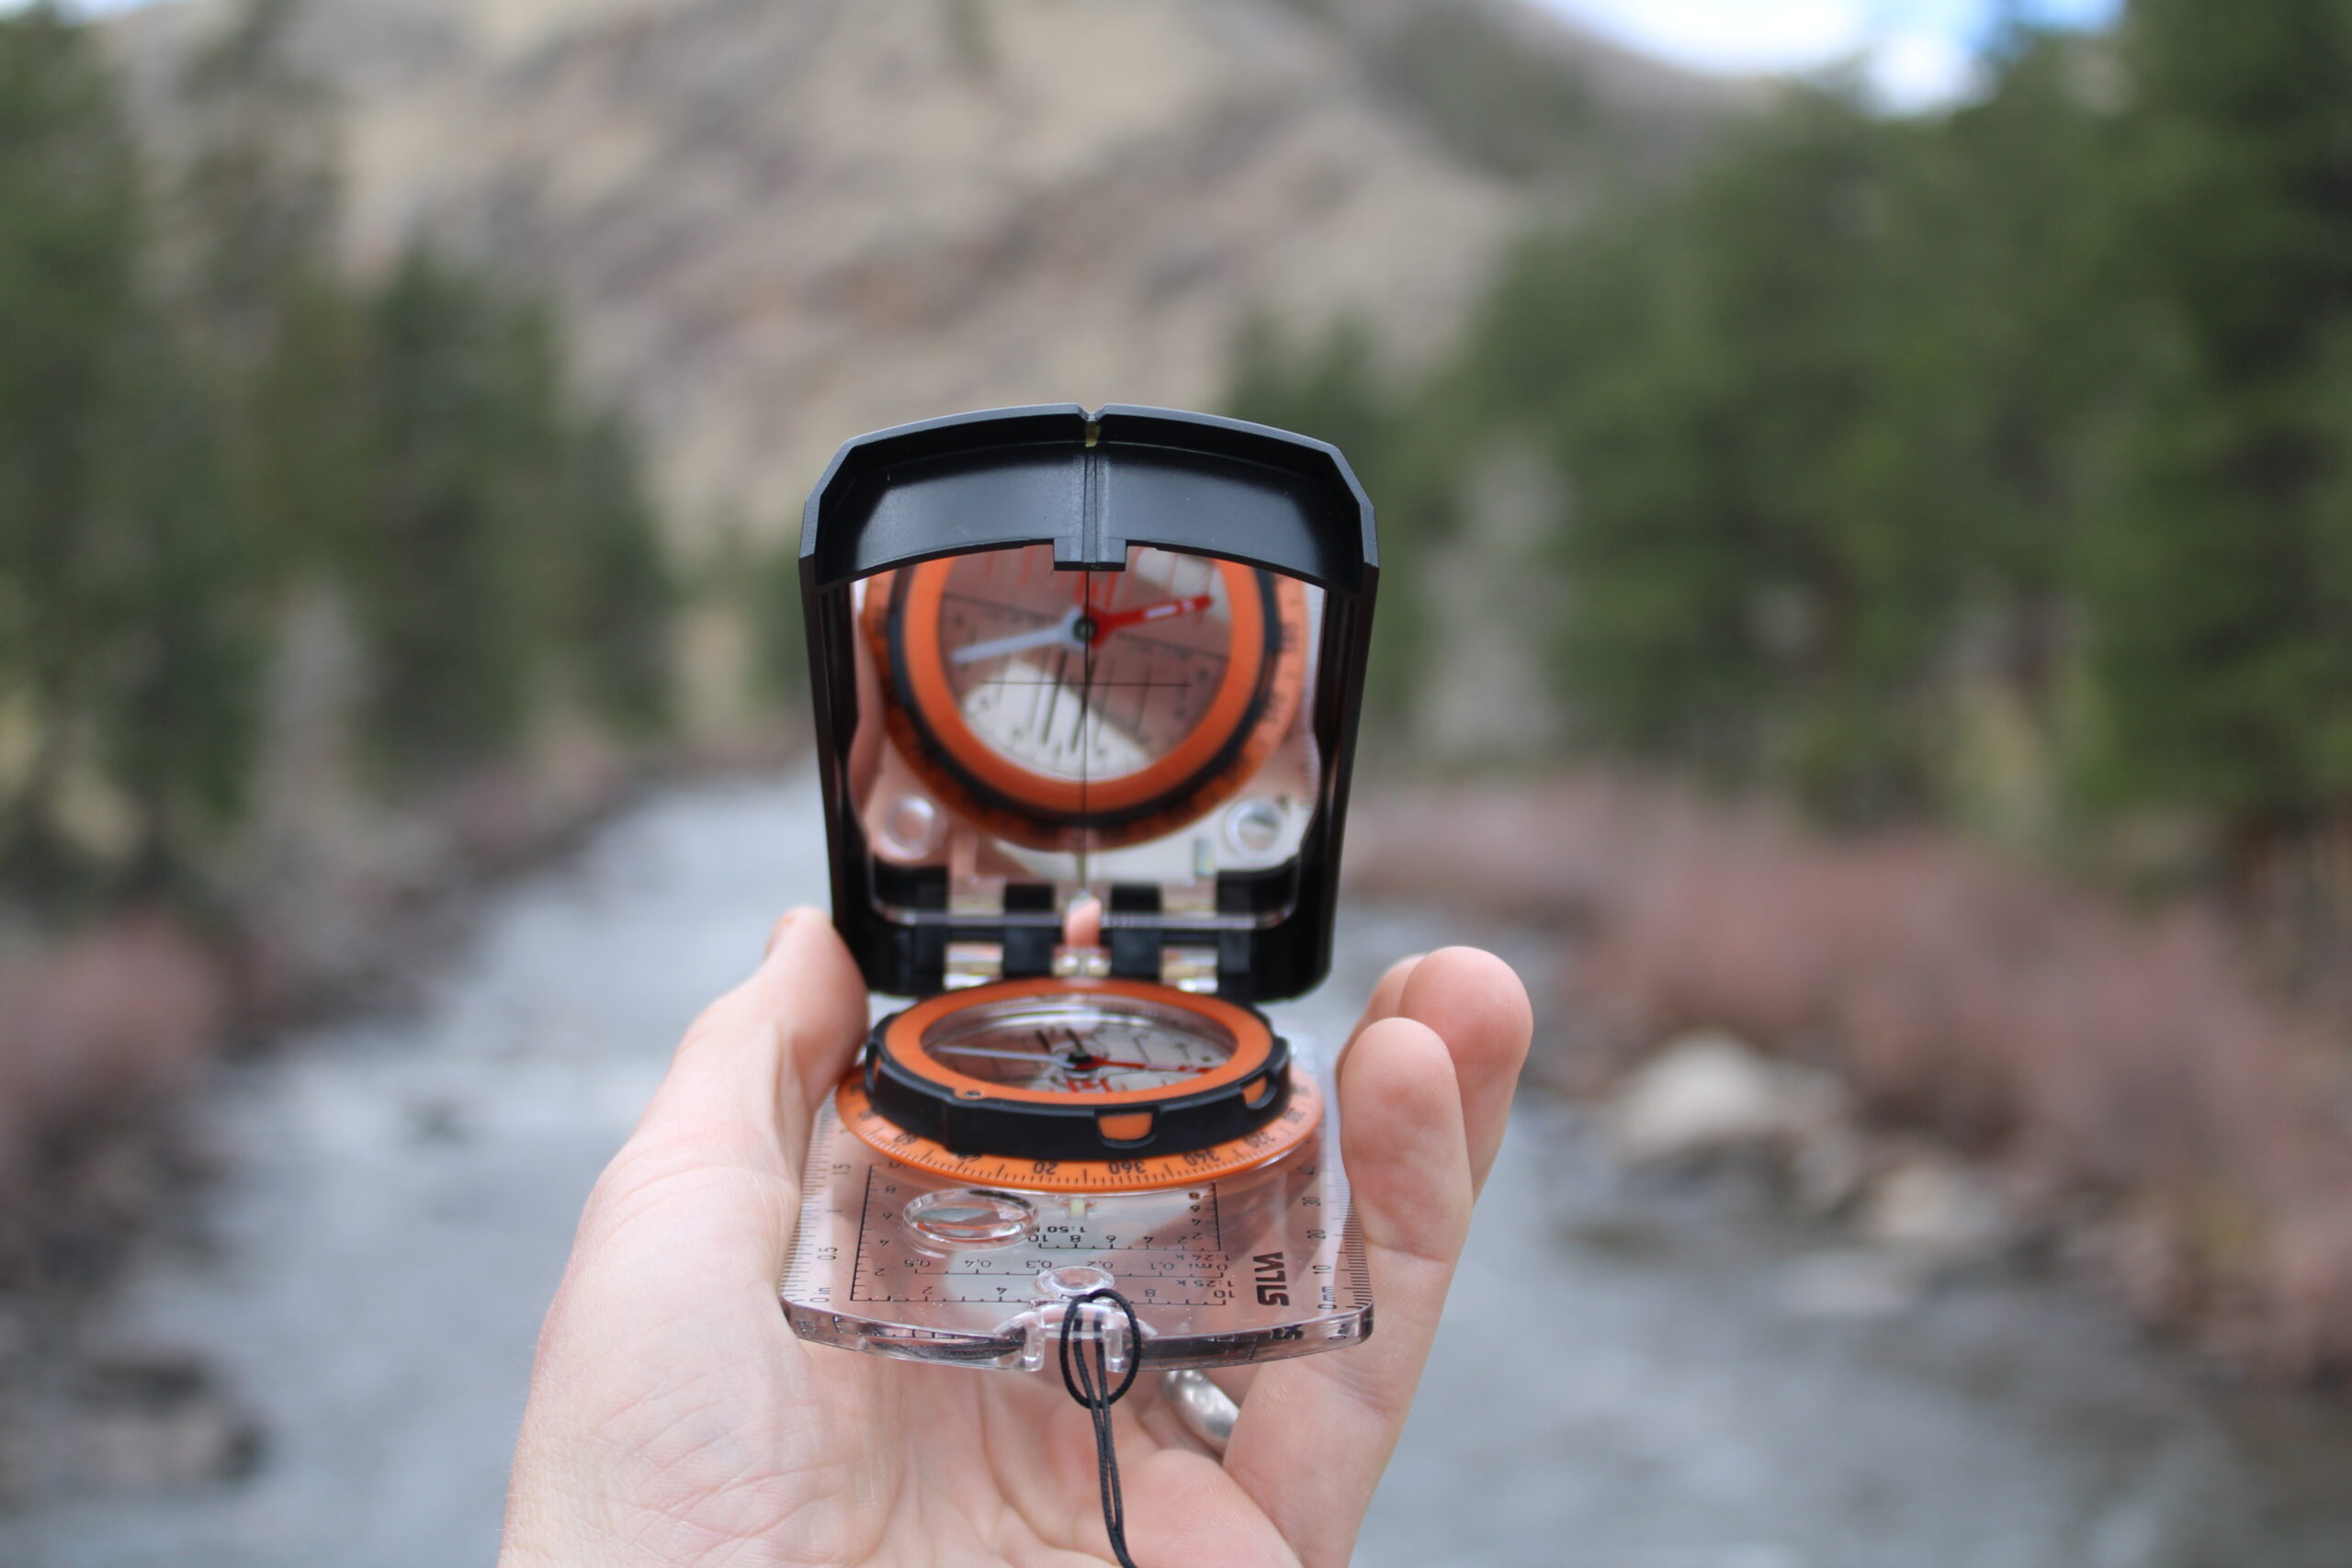 The best compasses like the Silva ranger are accurate and reliable